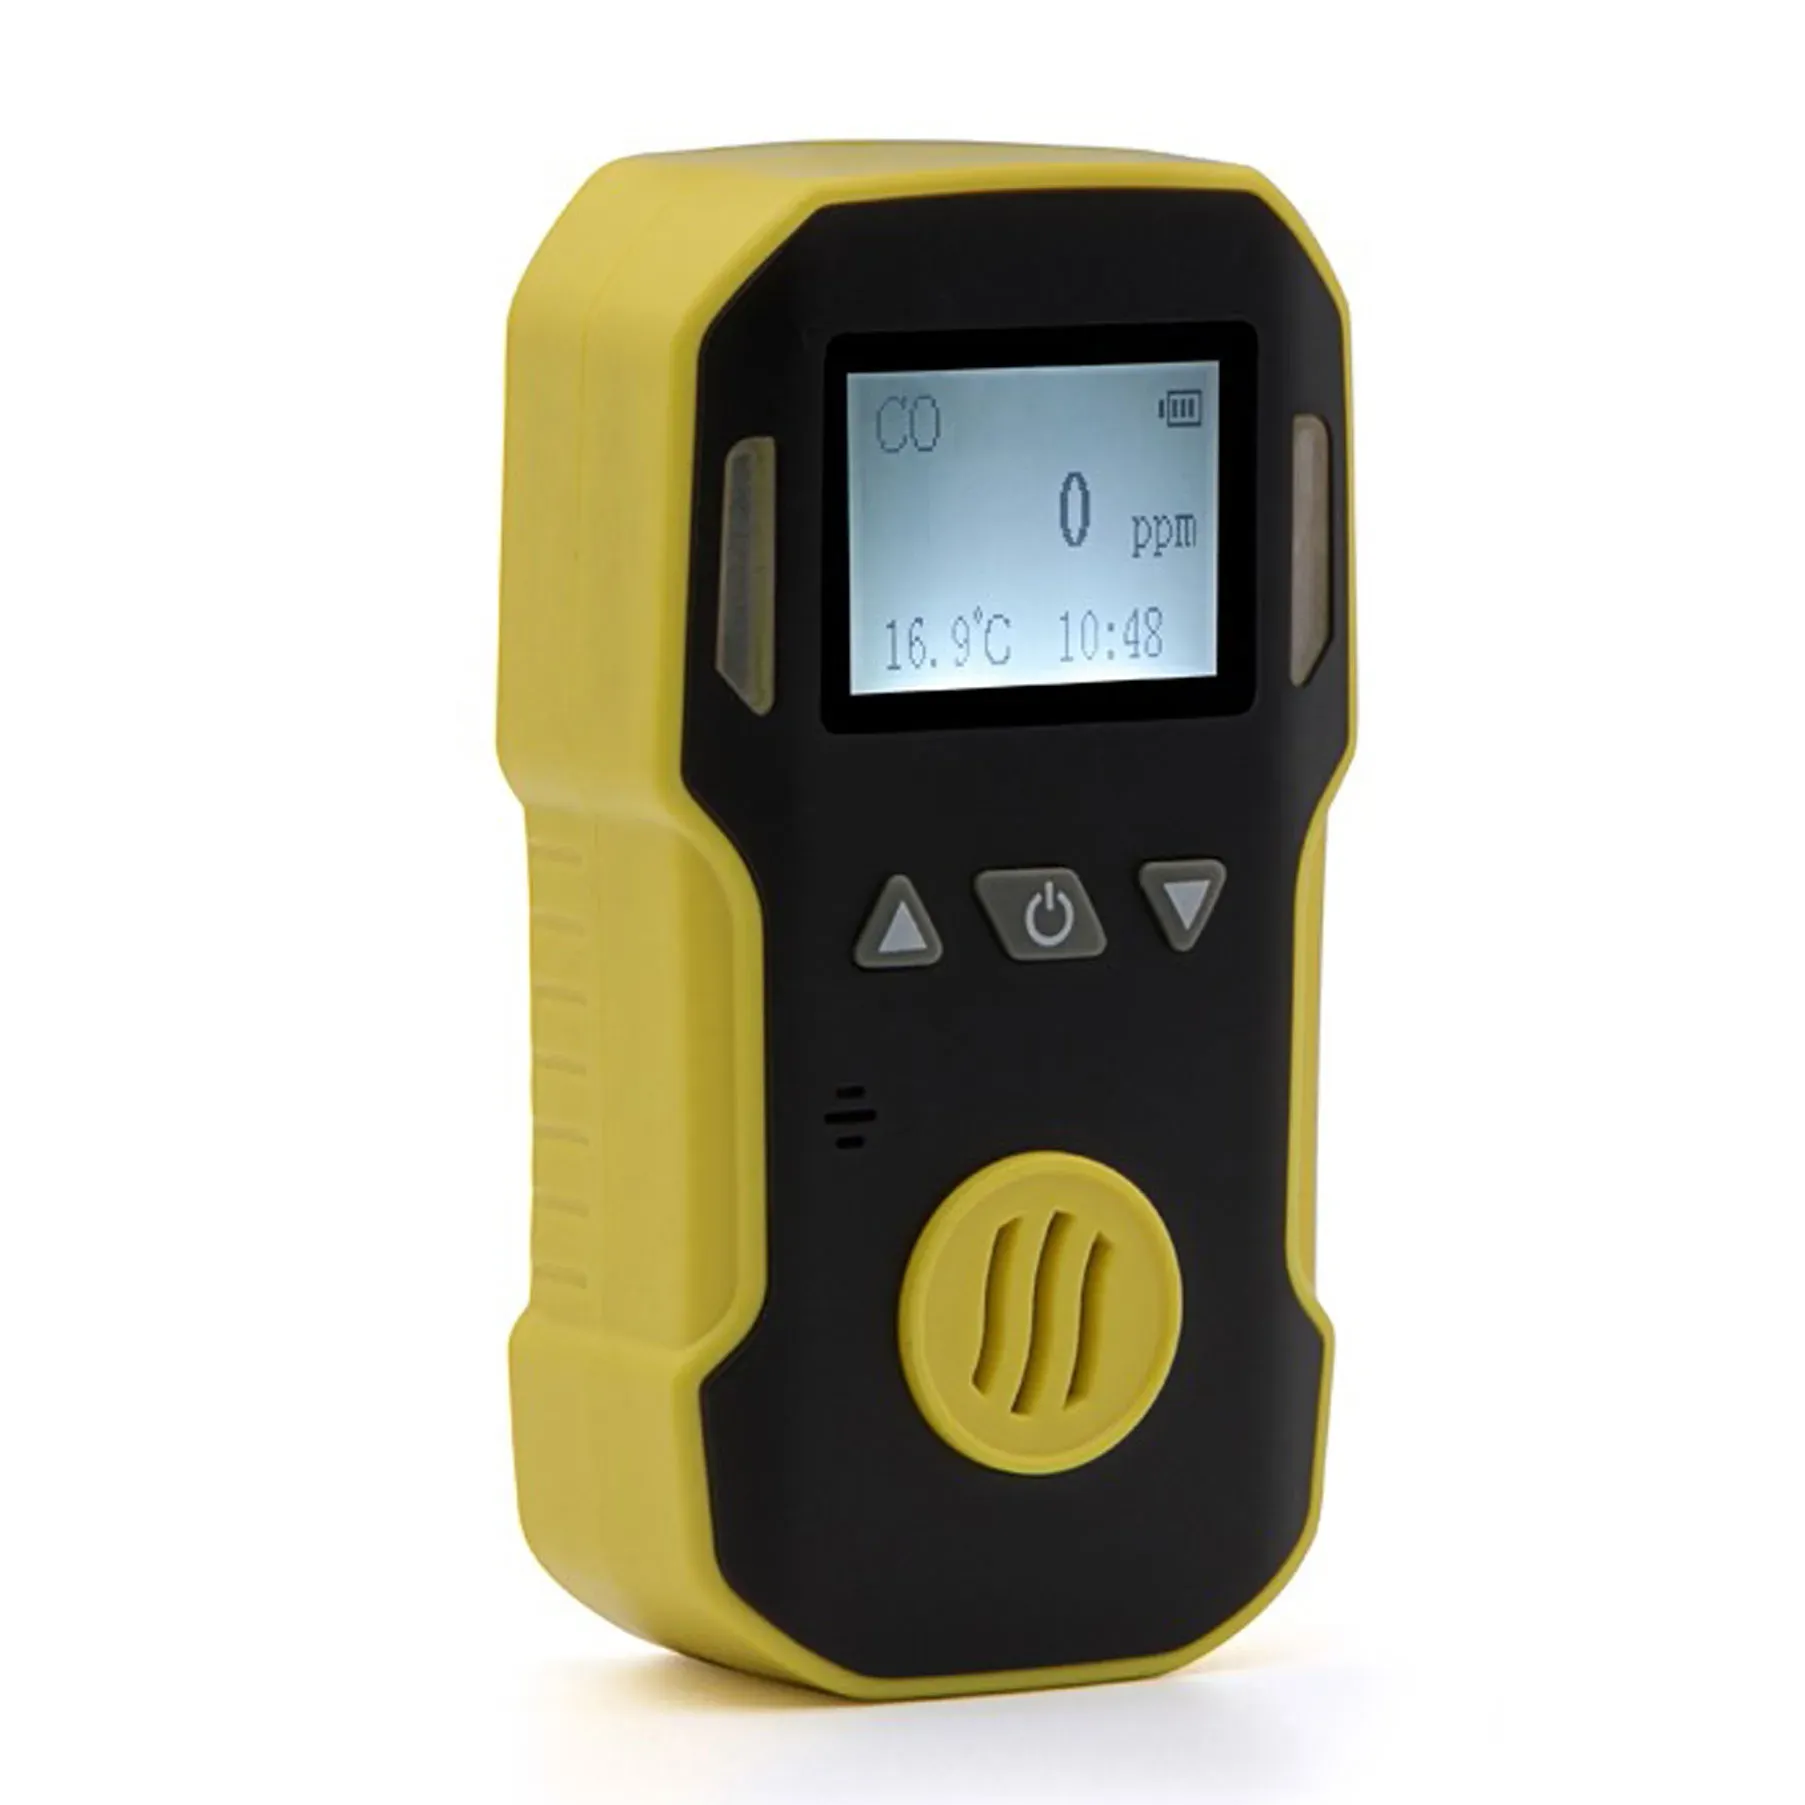 Digital Portable NO2 Gas Detector Meter Nitrogen dioxide Detector Tester BH-90A USB Rechargeable 0-20ppm Dust & Explosion Proof